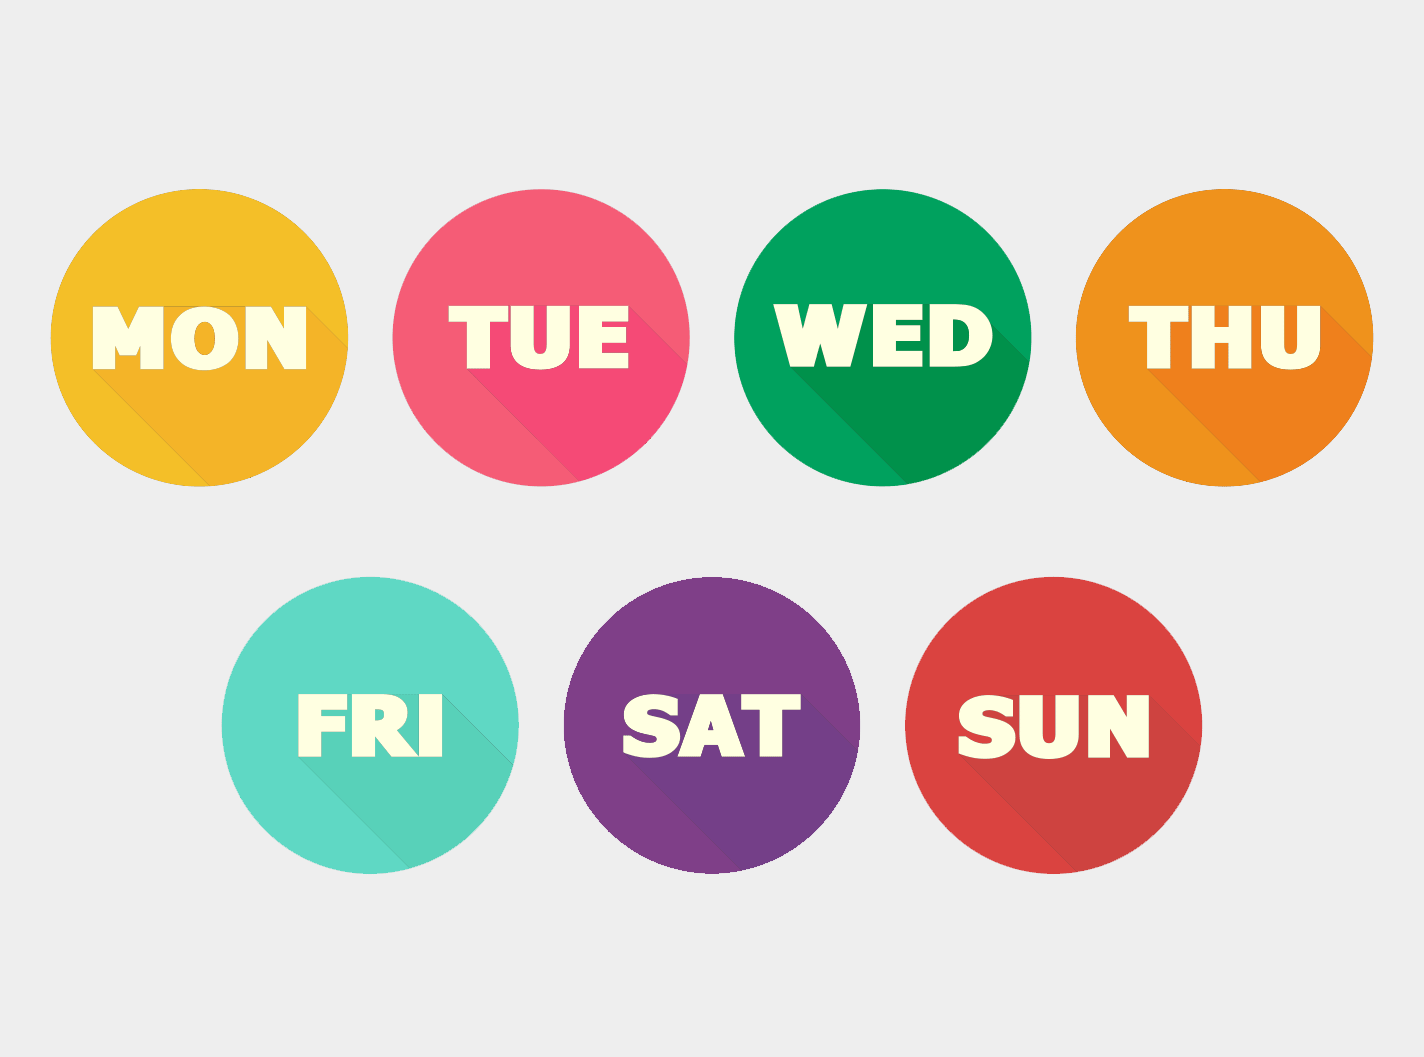 Days of the Week in Danish